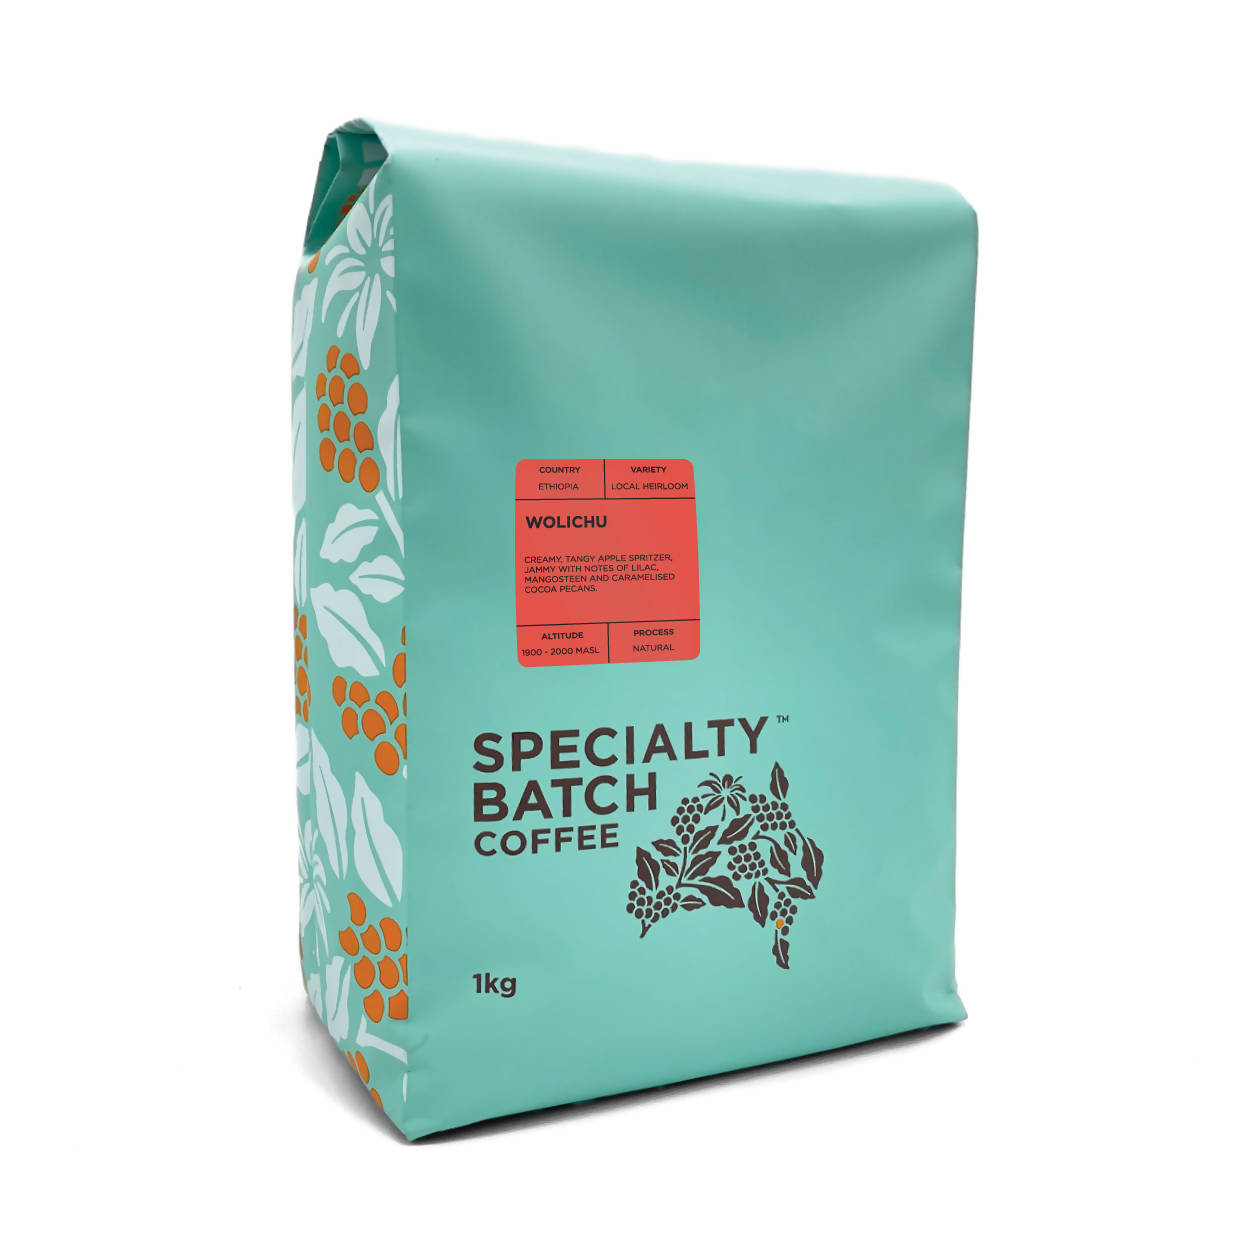 Ethiopia Wolichu - Filter - BeanBurds SPECIALTY BATCH COFFEE 250g (10 - 12 cups) / Whole beans